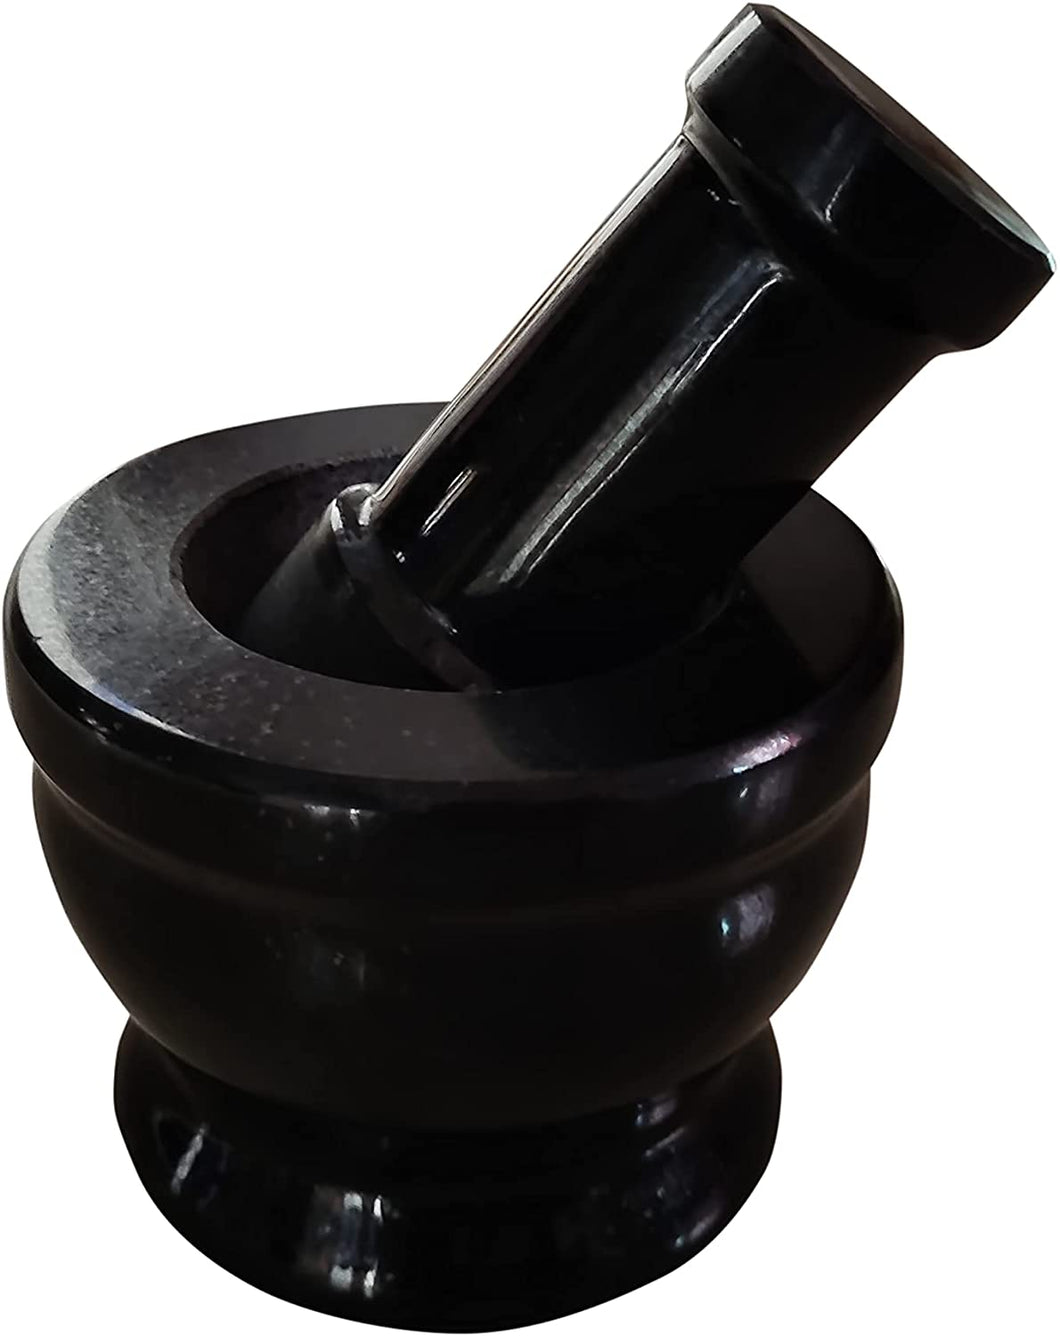 Black Granite Stone Mortar and Pestle Set (5.5 inch) for Spices, Okhli Musal, Herb, Well Design for Kitchen and Home Natural & Traditional Grinder